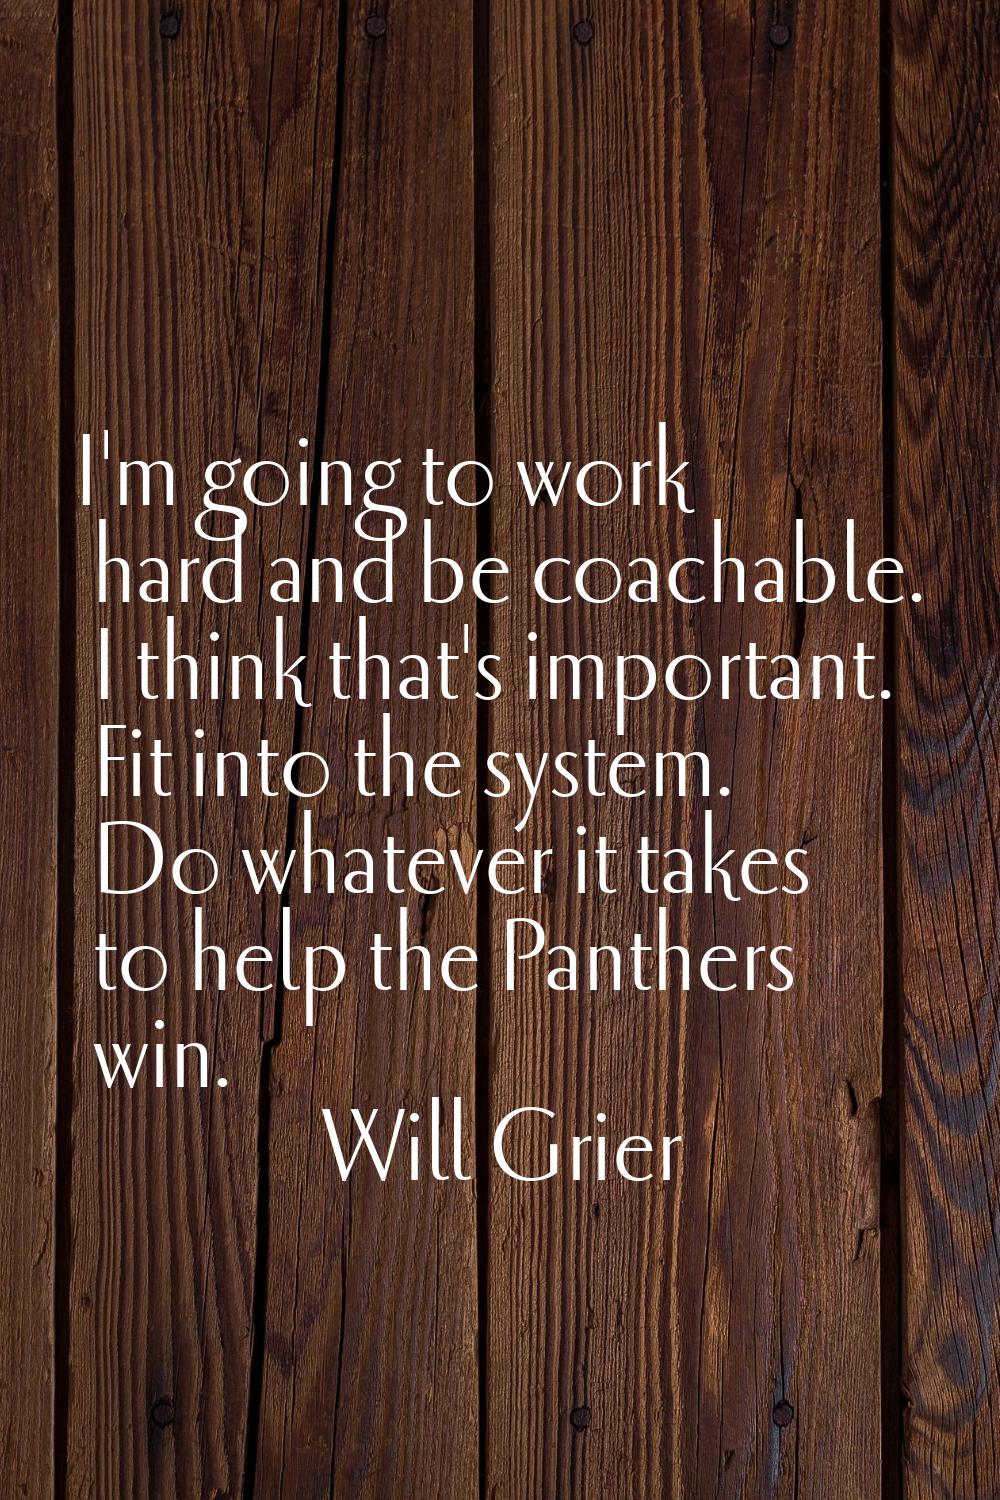 I'm going to work hard and be coachable. I think that's important. Fit into the system. Do whatever